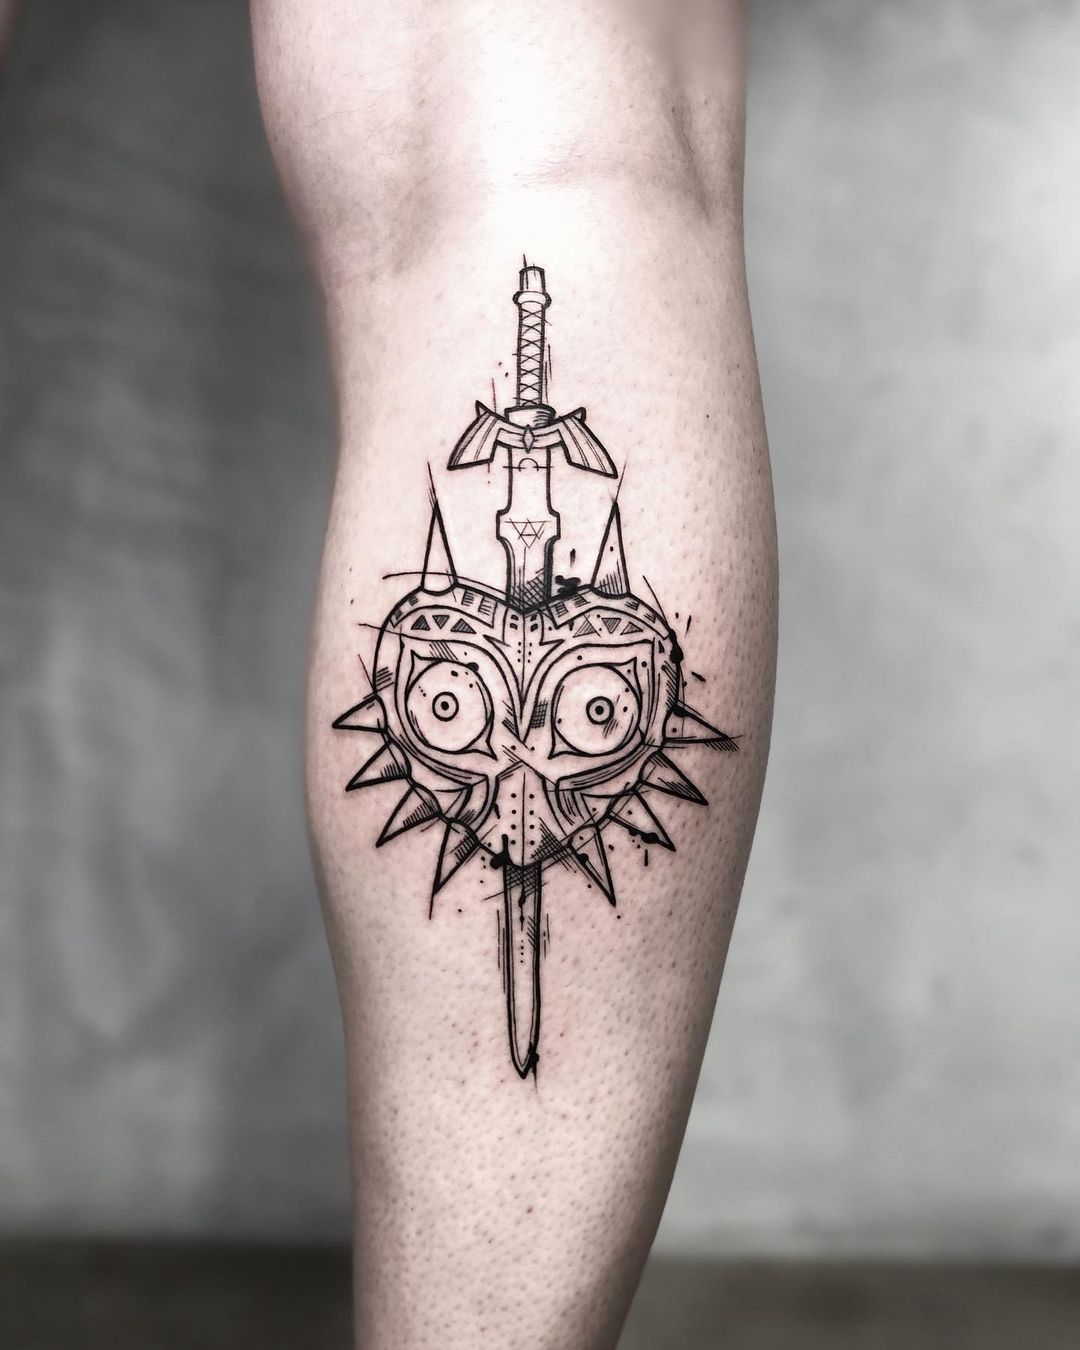 101 Amazing Triforce Tattoo Designs You Need To See  Zelda tattoo Tattoo  designs Tattoos